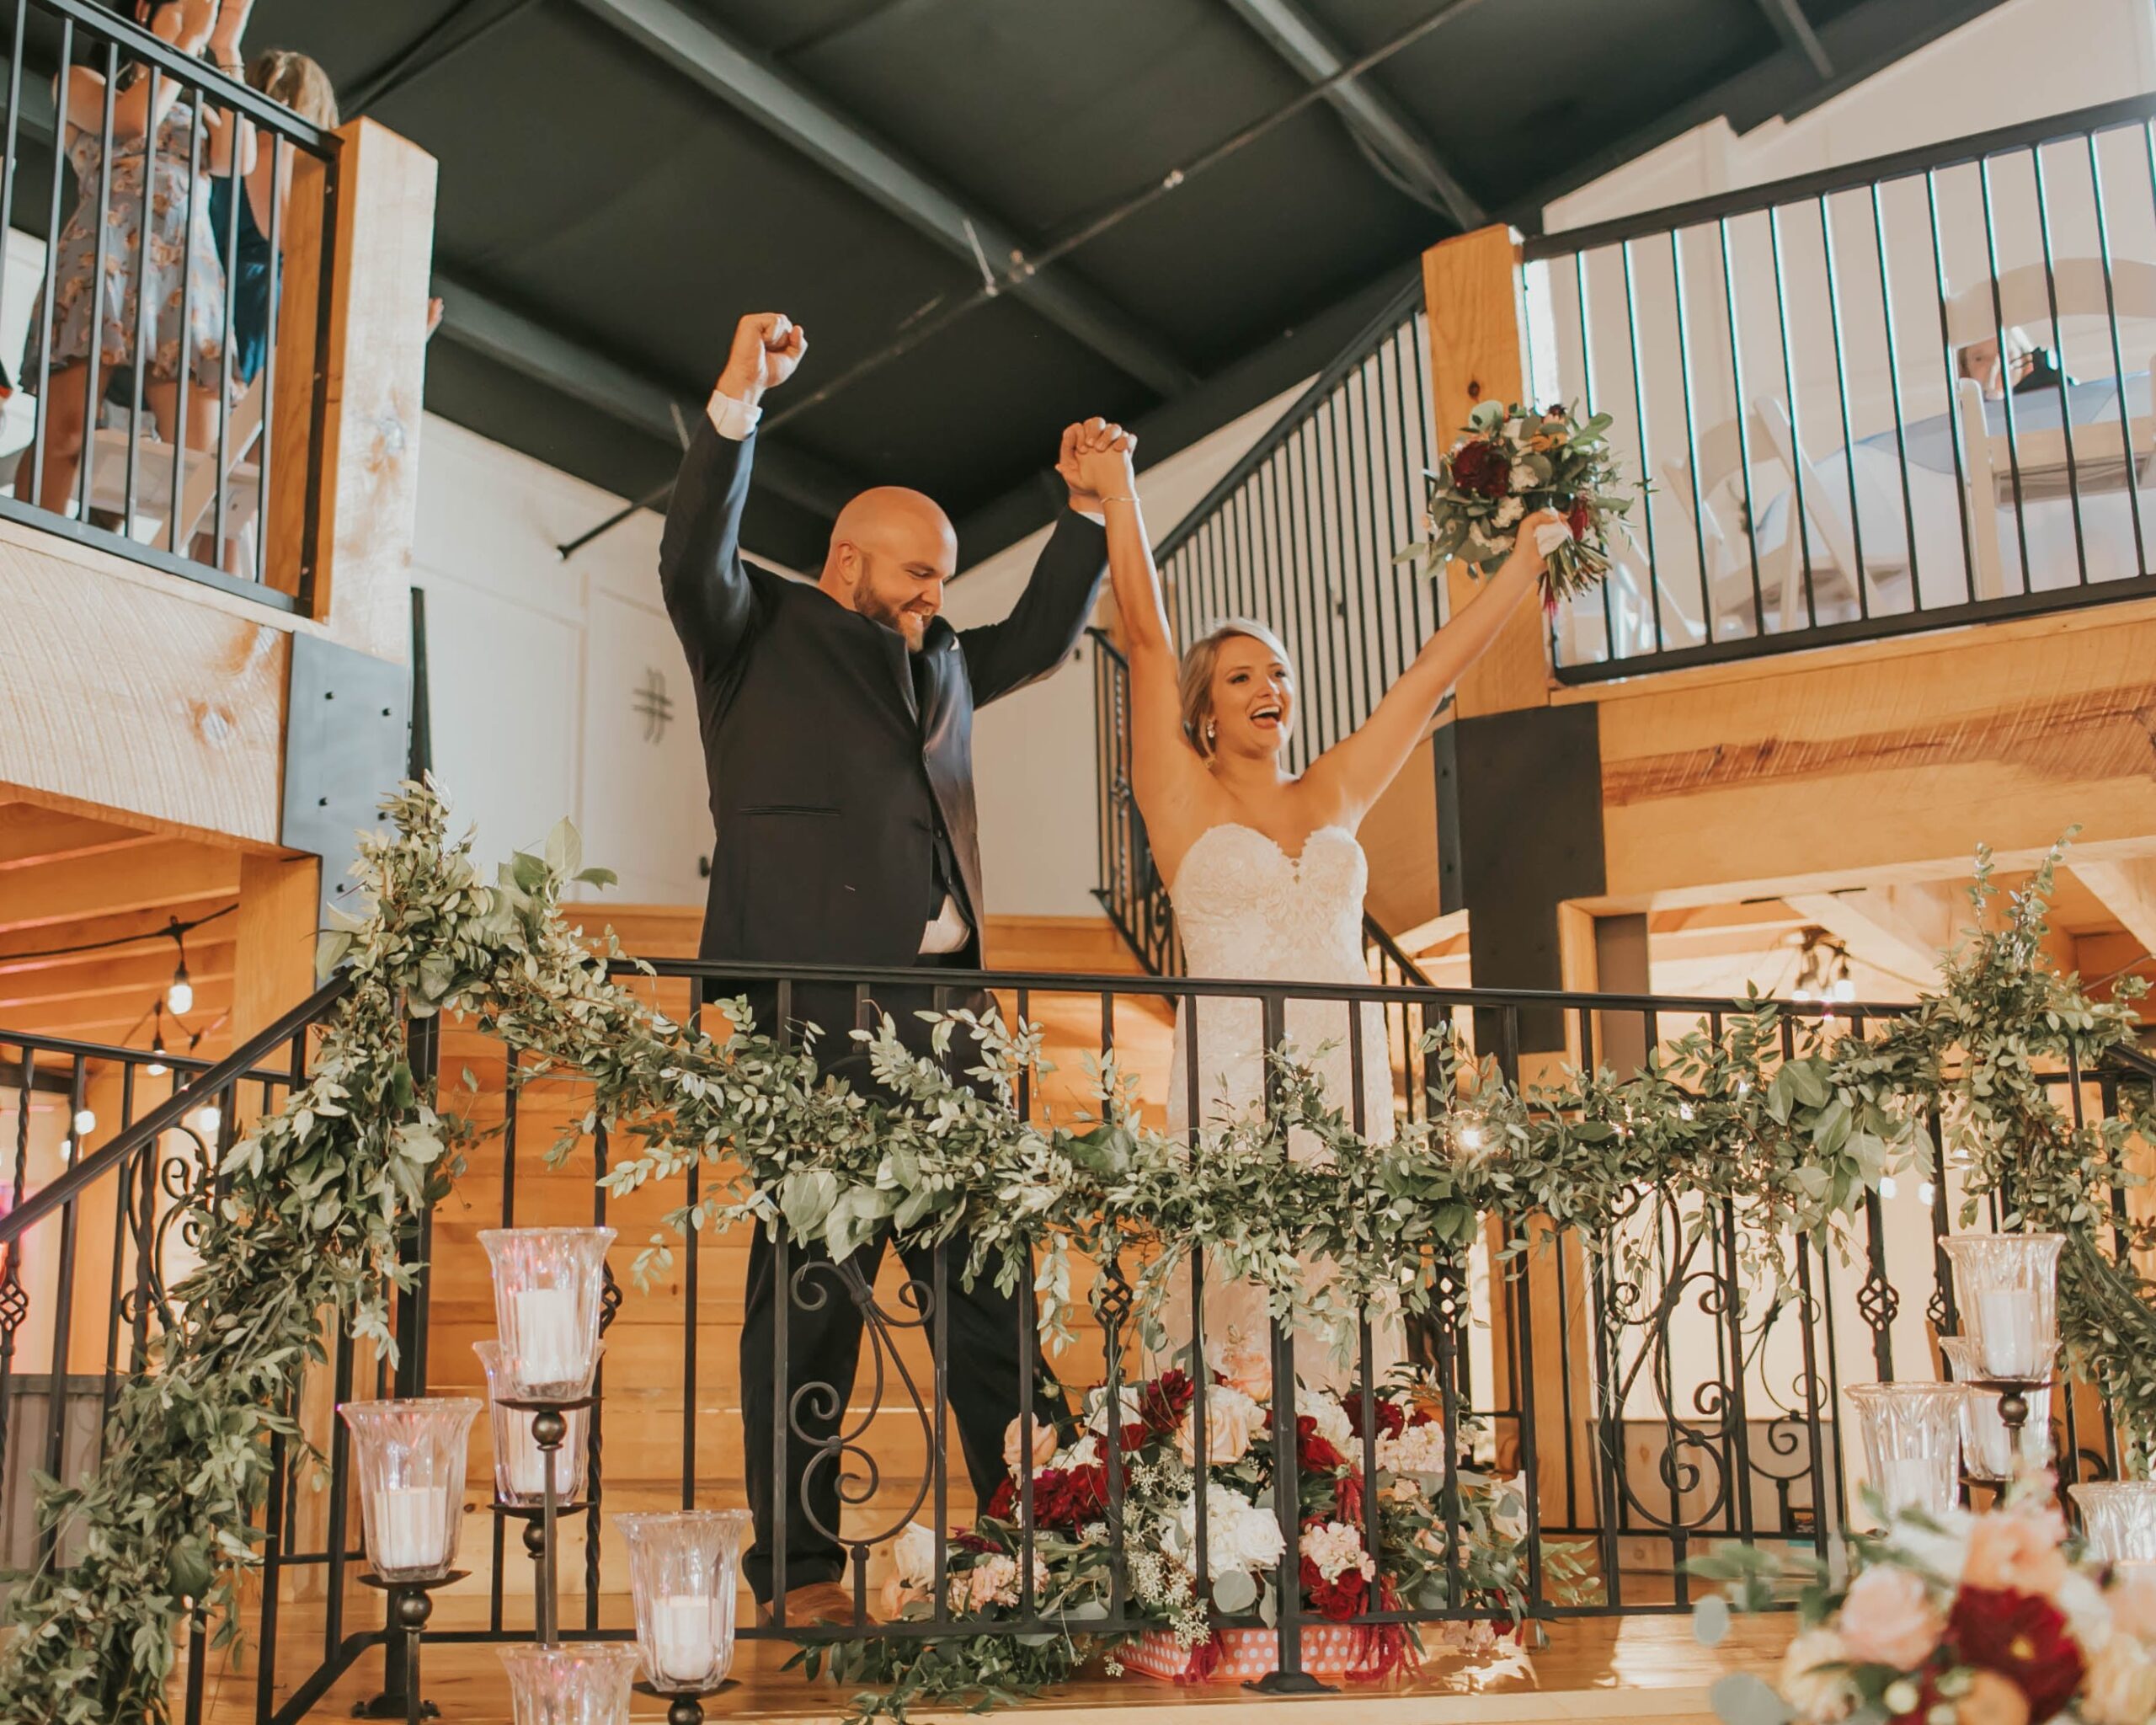 A newly married couple celebrating at The Vineyard Hall - A Rustic Wedding Venue